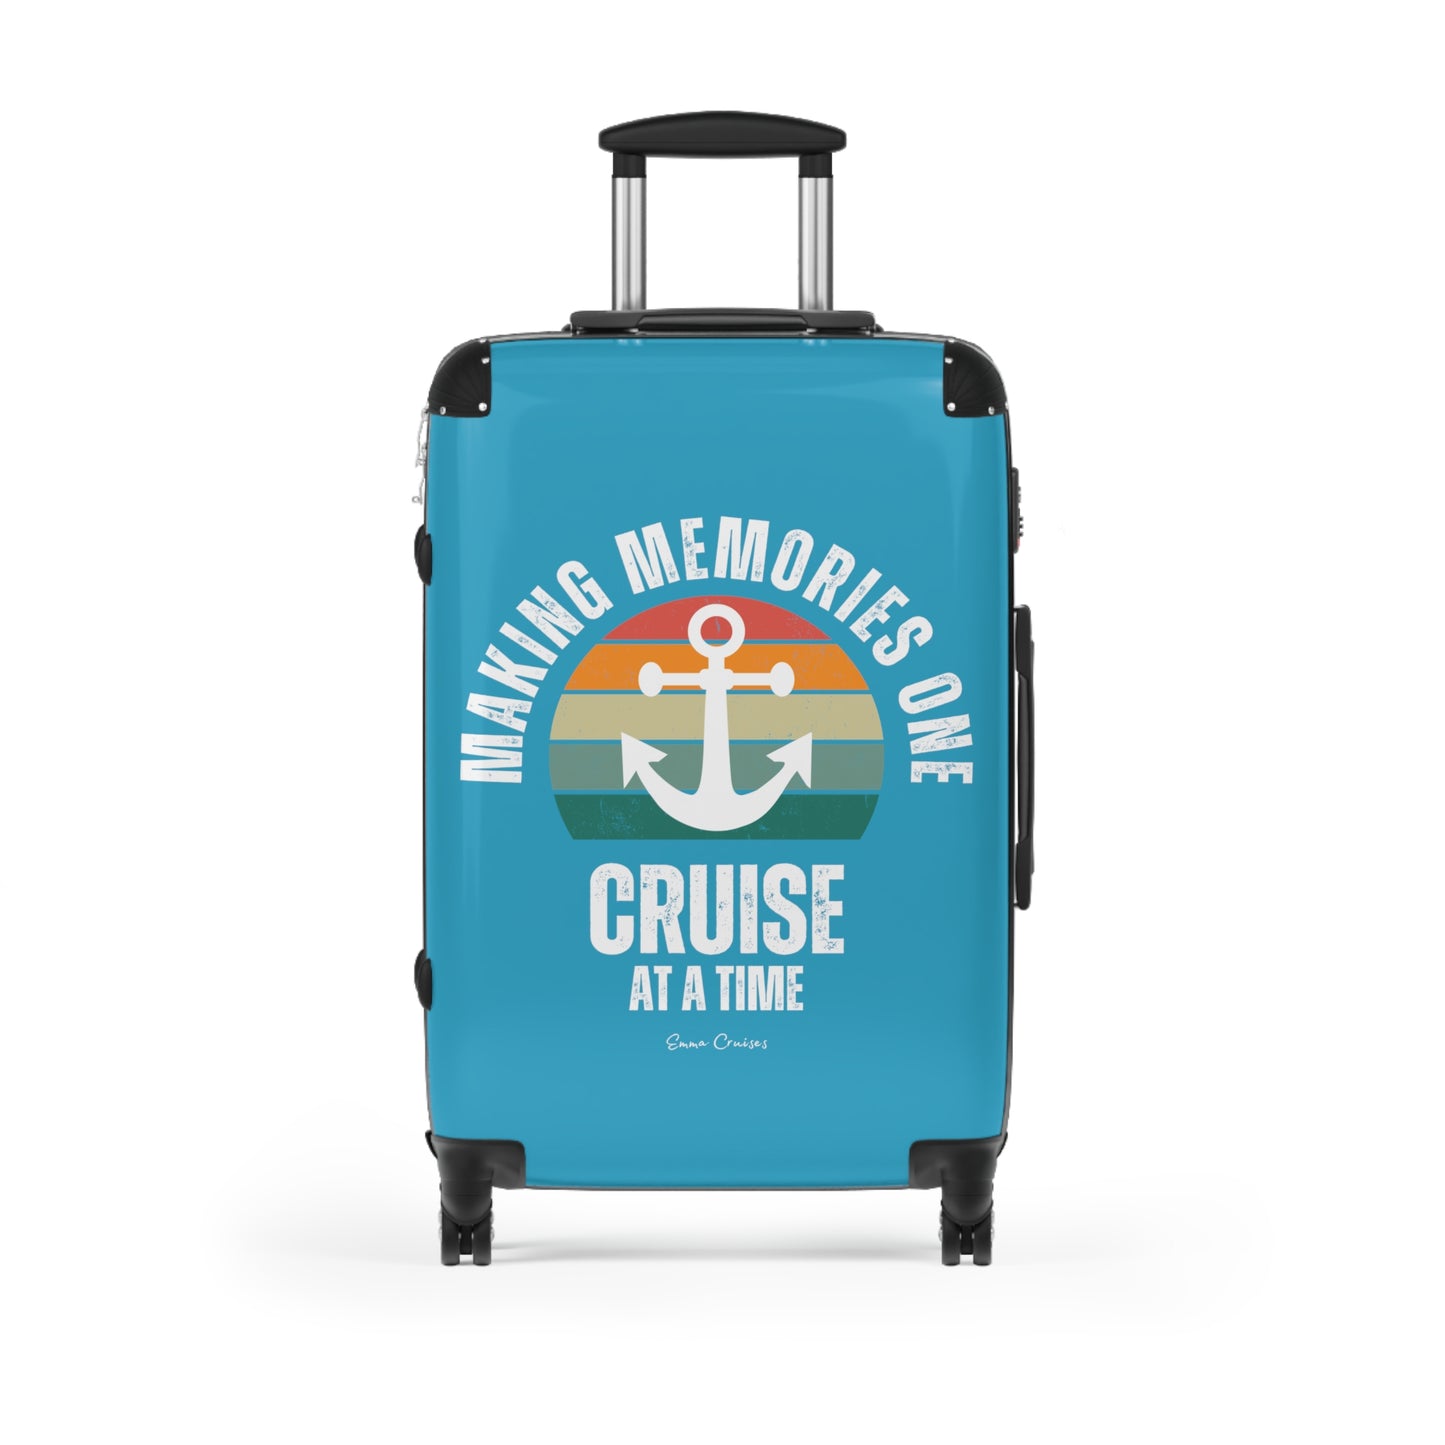 Making Memories One Cruise at a Time - Suitcase